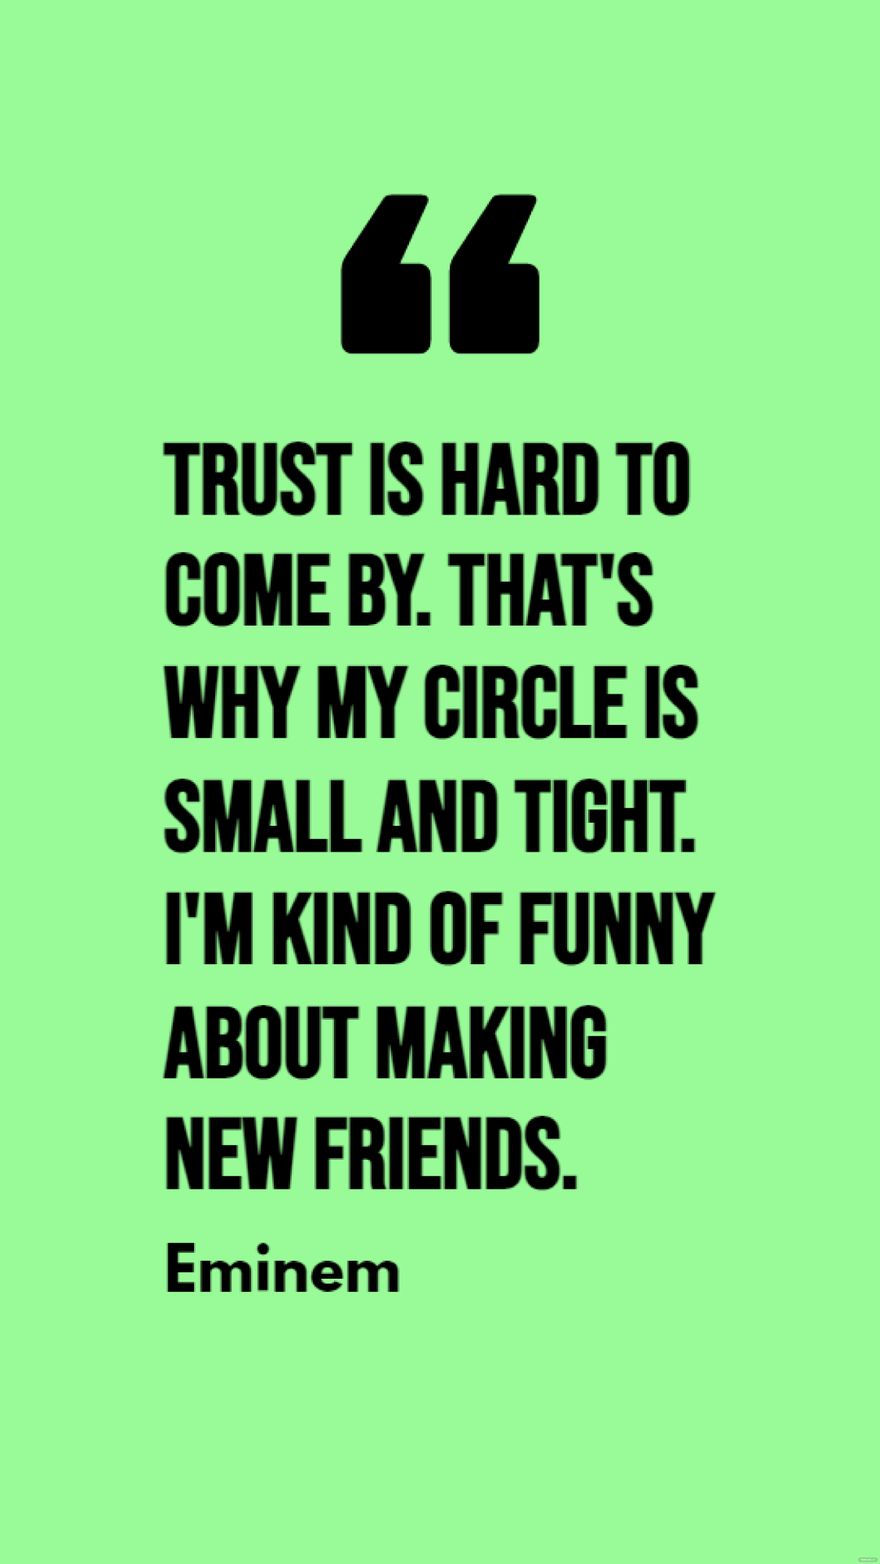 Free Eminem - Trust is hard to come by. That's why my circle is small and tight. I'm kind of funny about making new friends. in JPG